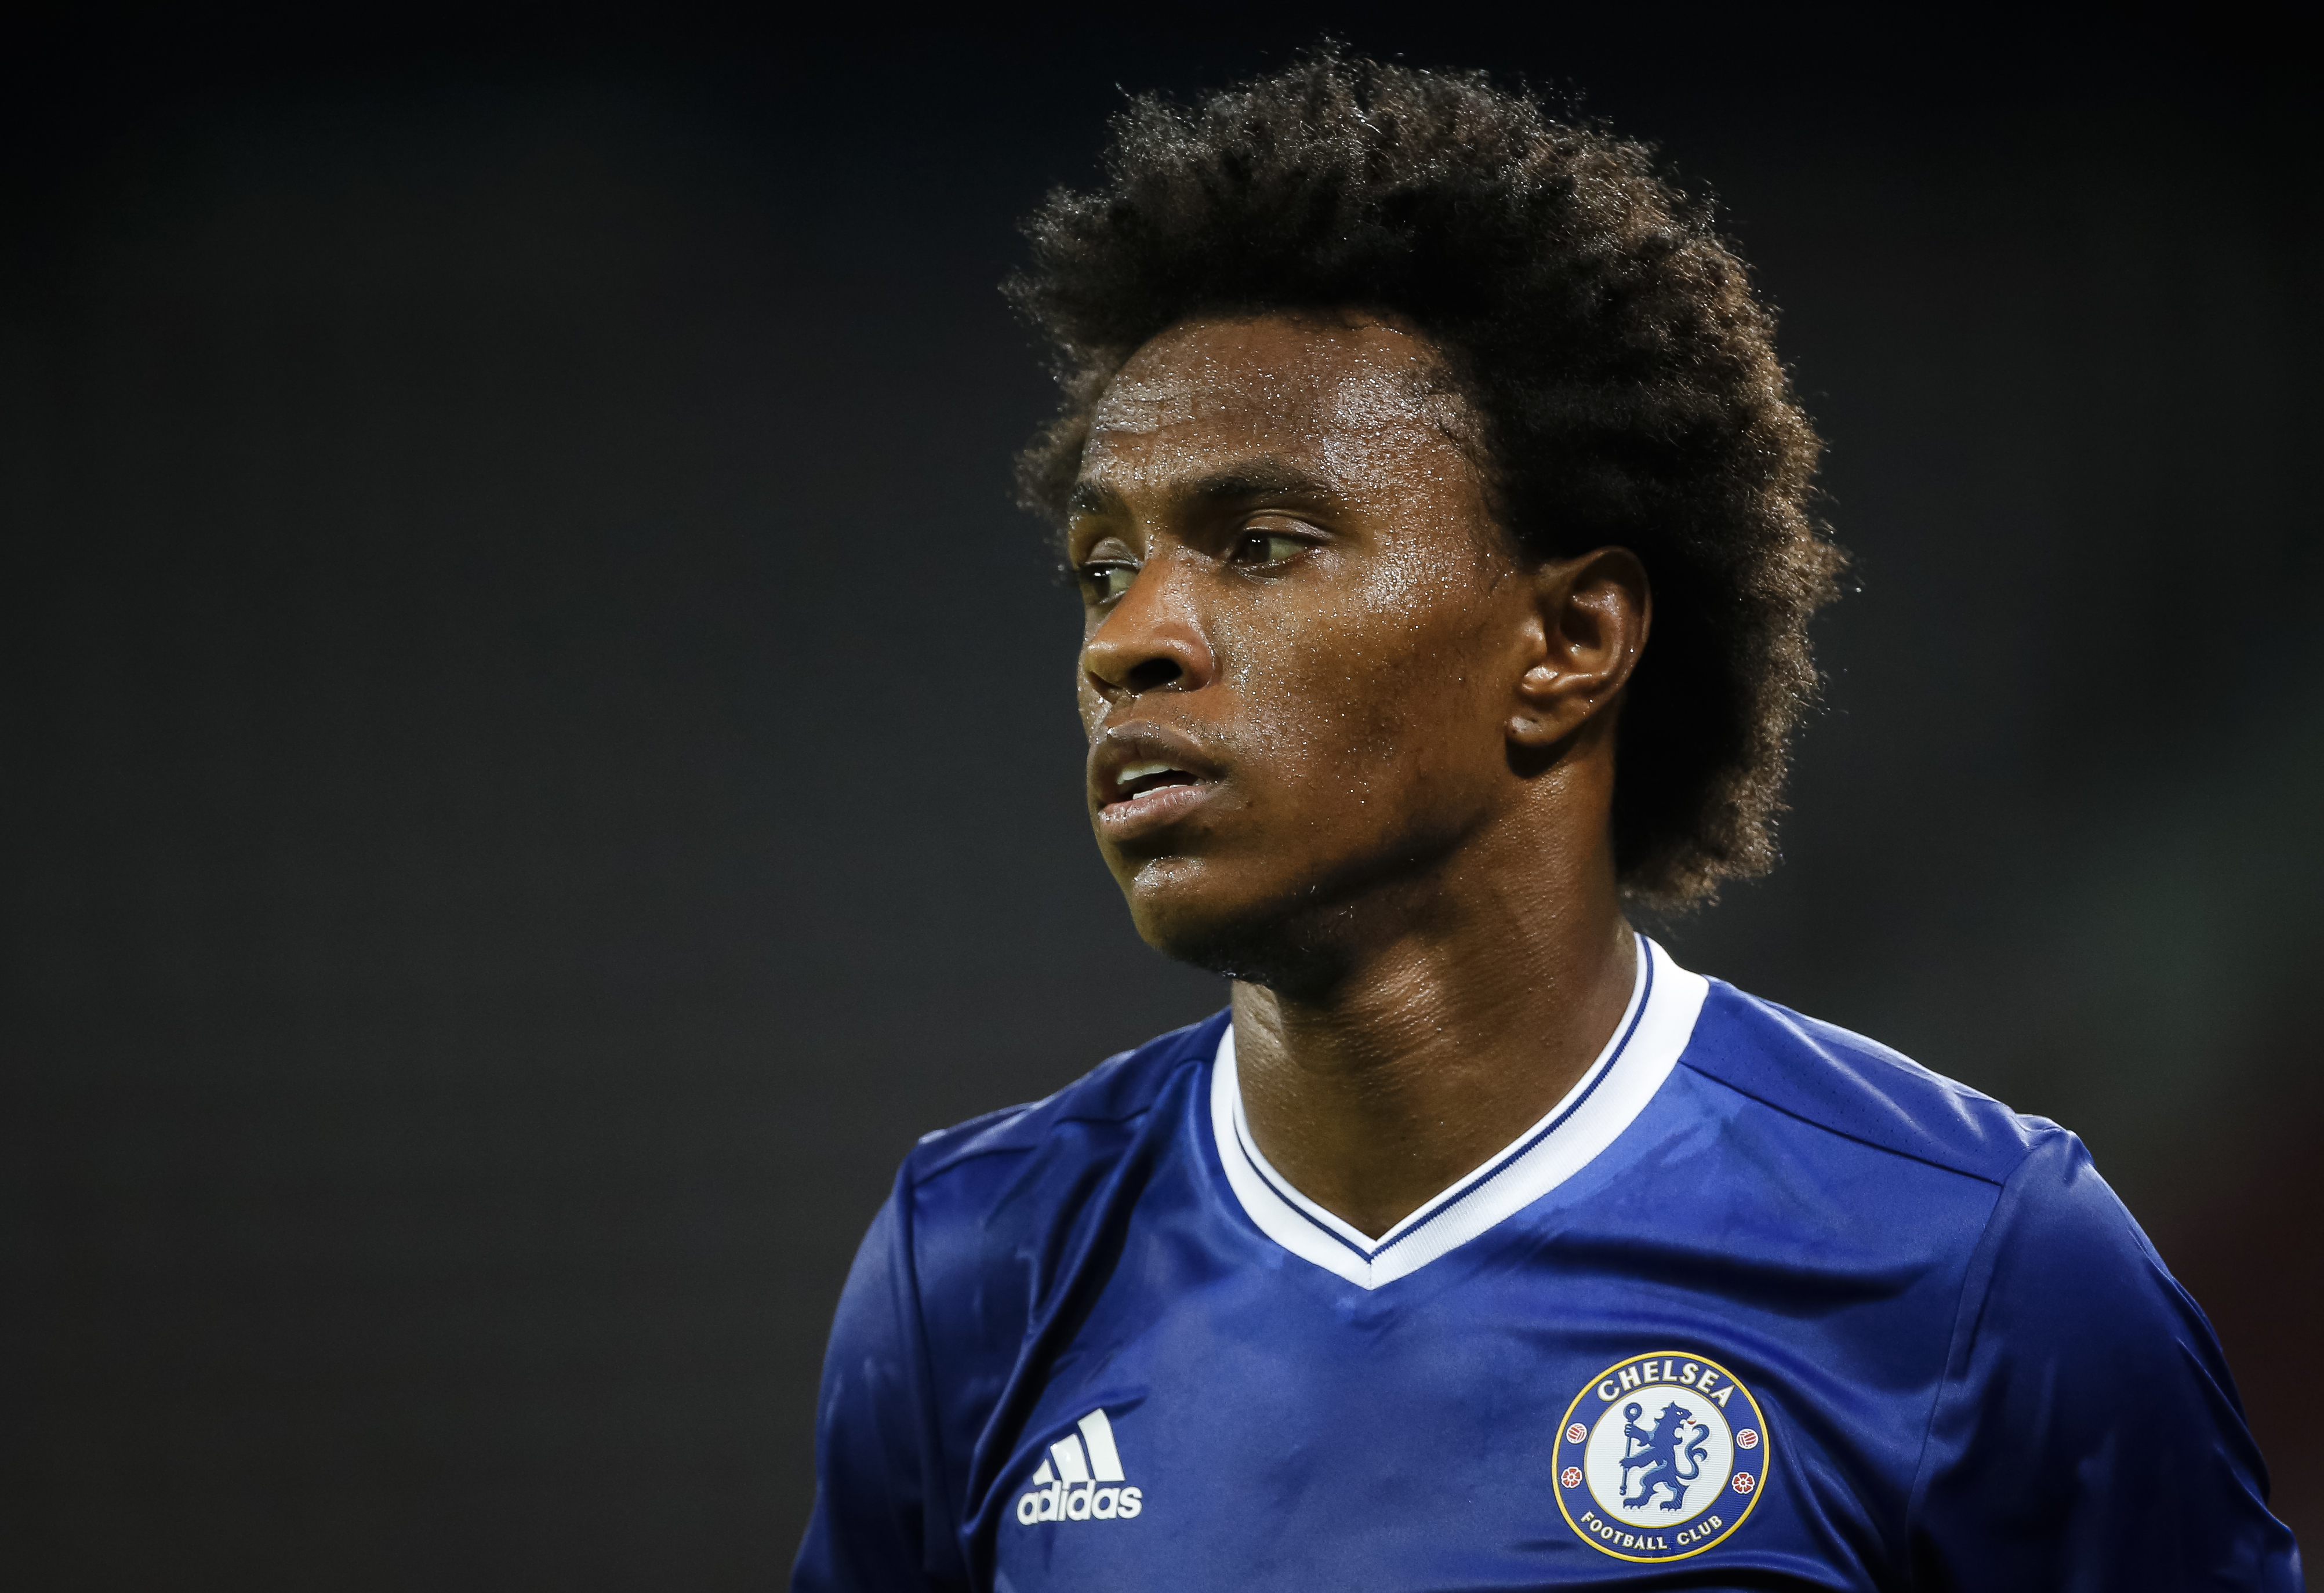 VELDEN, AUSTRIA - JULY 20: Willian of Chelsea looks on during the friendly match between WAC RZ Pellets and Chelsea F.C. at Worthersee Stadion on July 20, 2016 in Velden, Austria. (Photo by Srdjan Stevanovic/Getty Images)